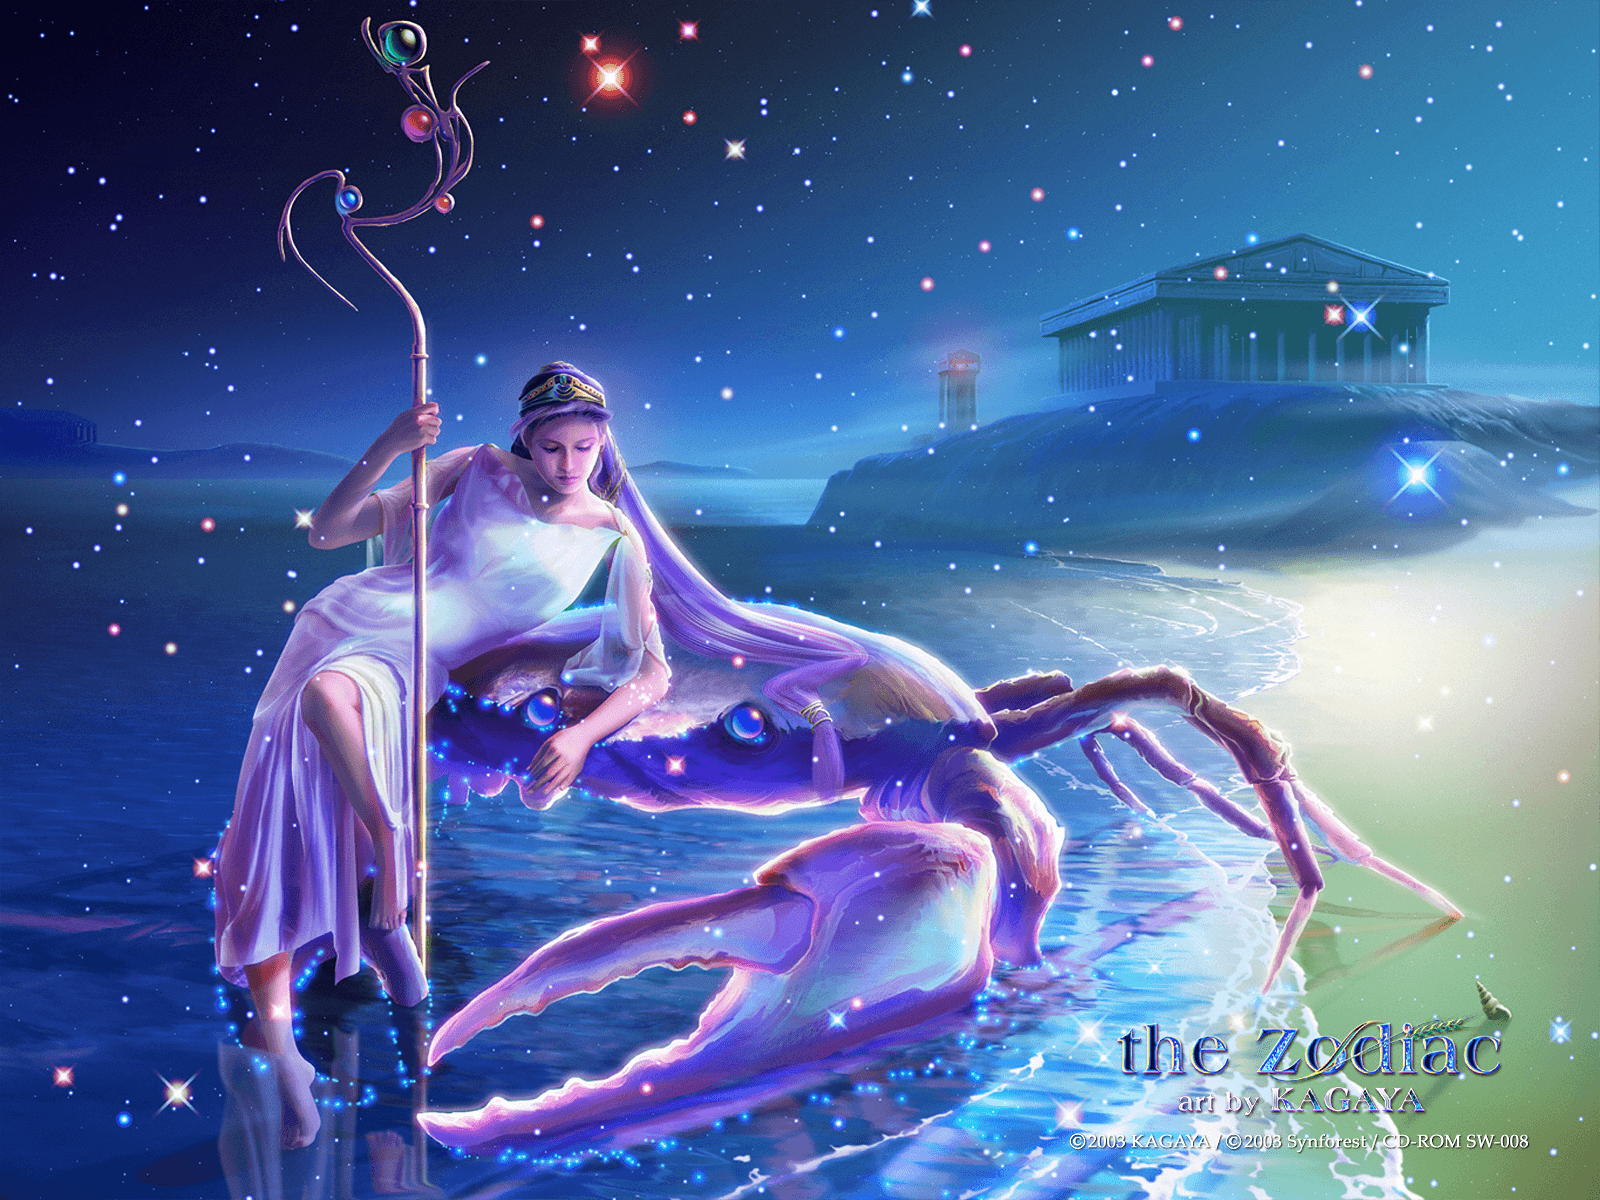 Wallpaper Zodiac art by Kagaya. Most beautiful places in the world